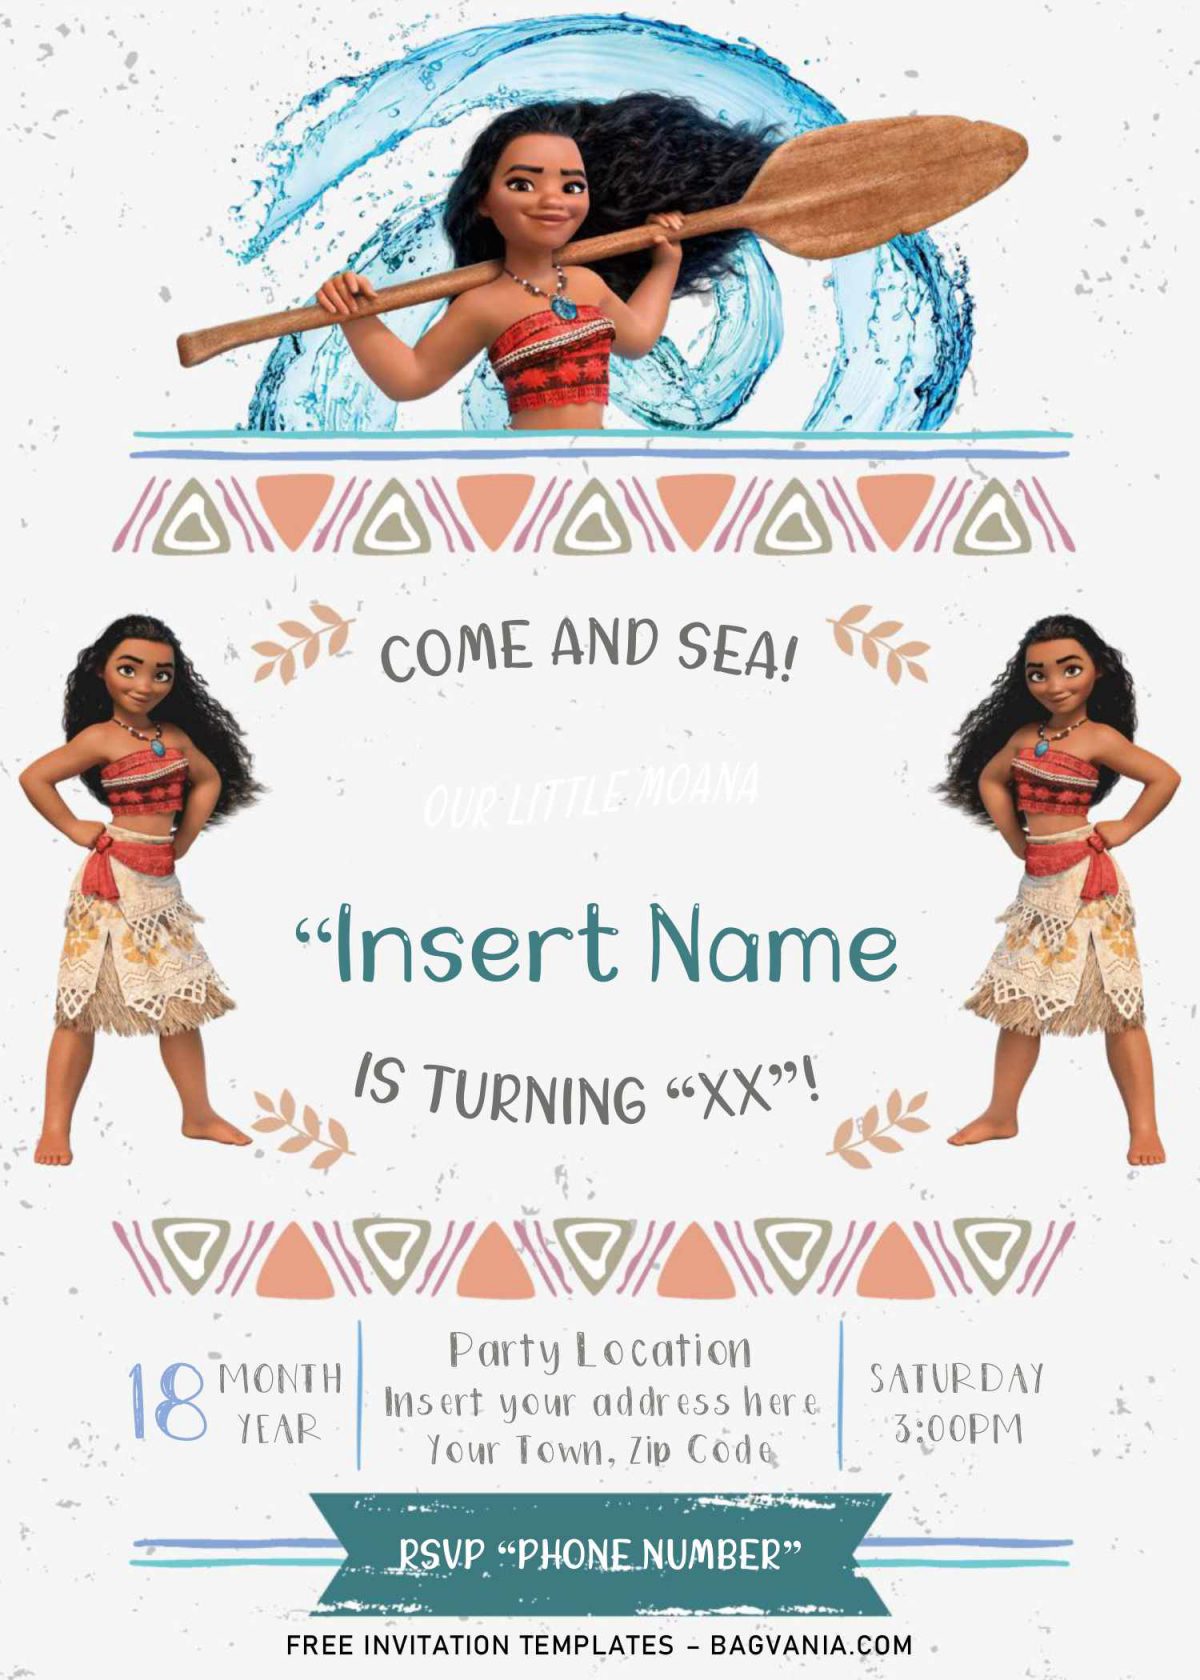 Free Moana Birthday Invitation Templates For Word and has portrait orientation card design